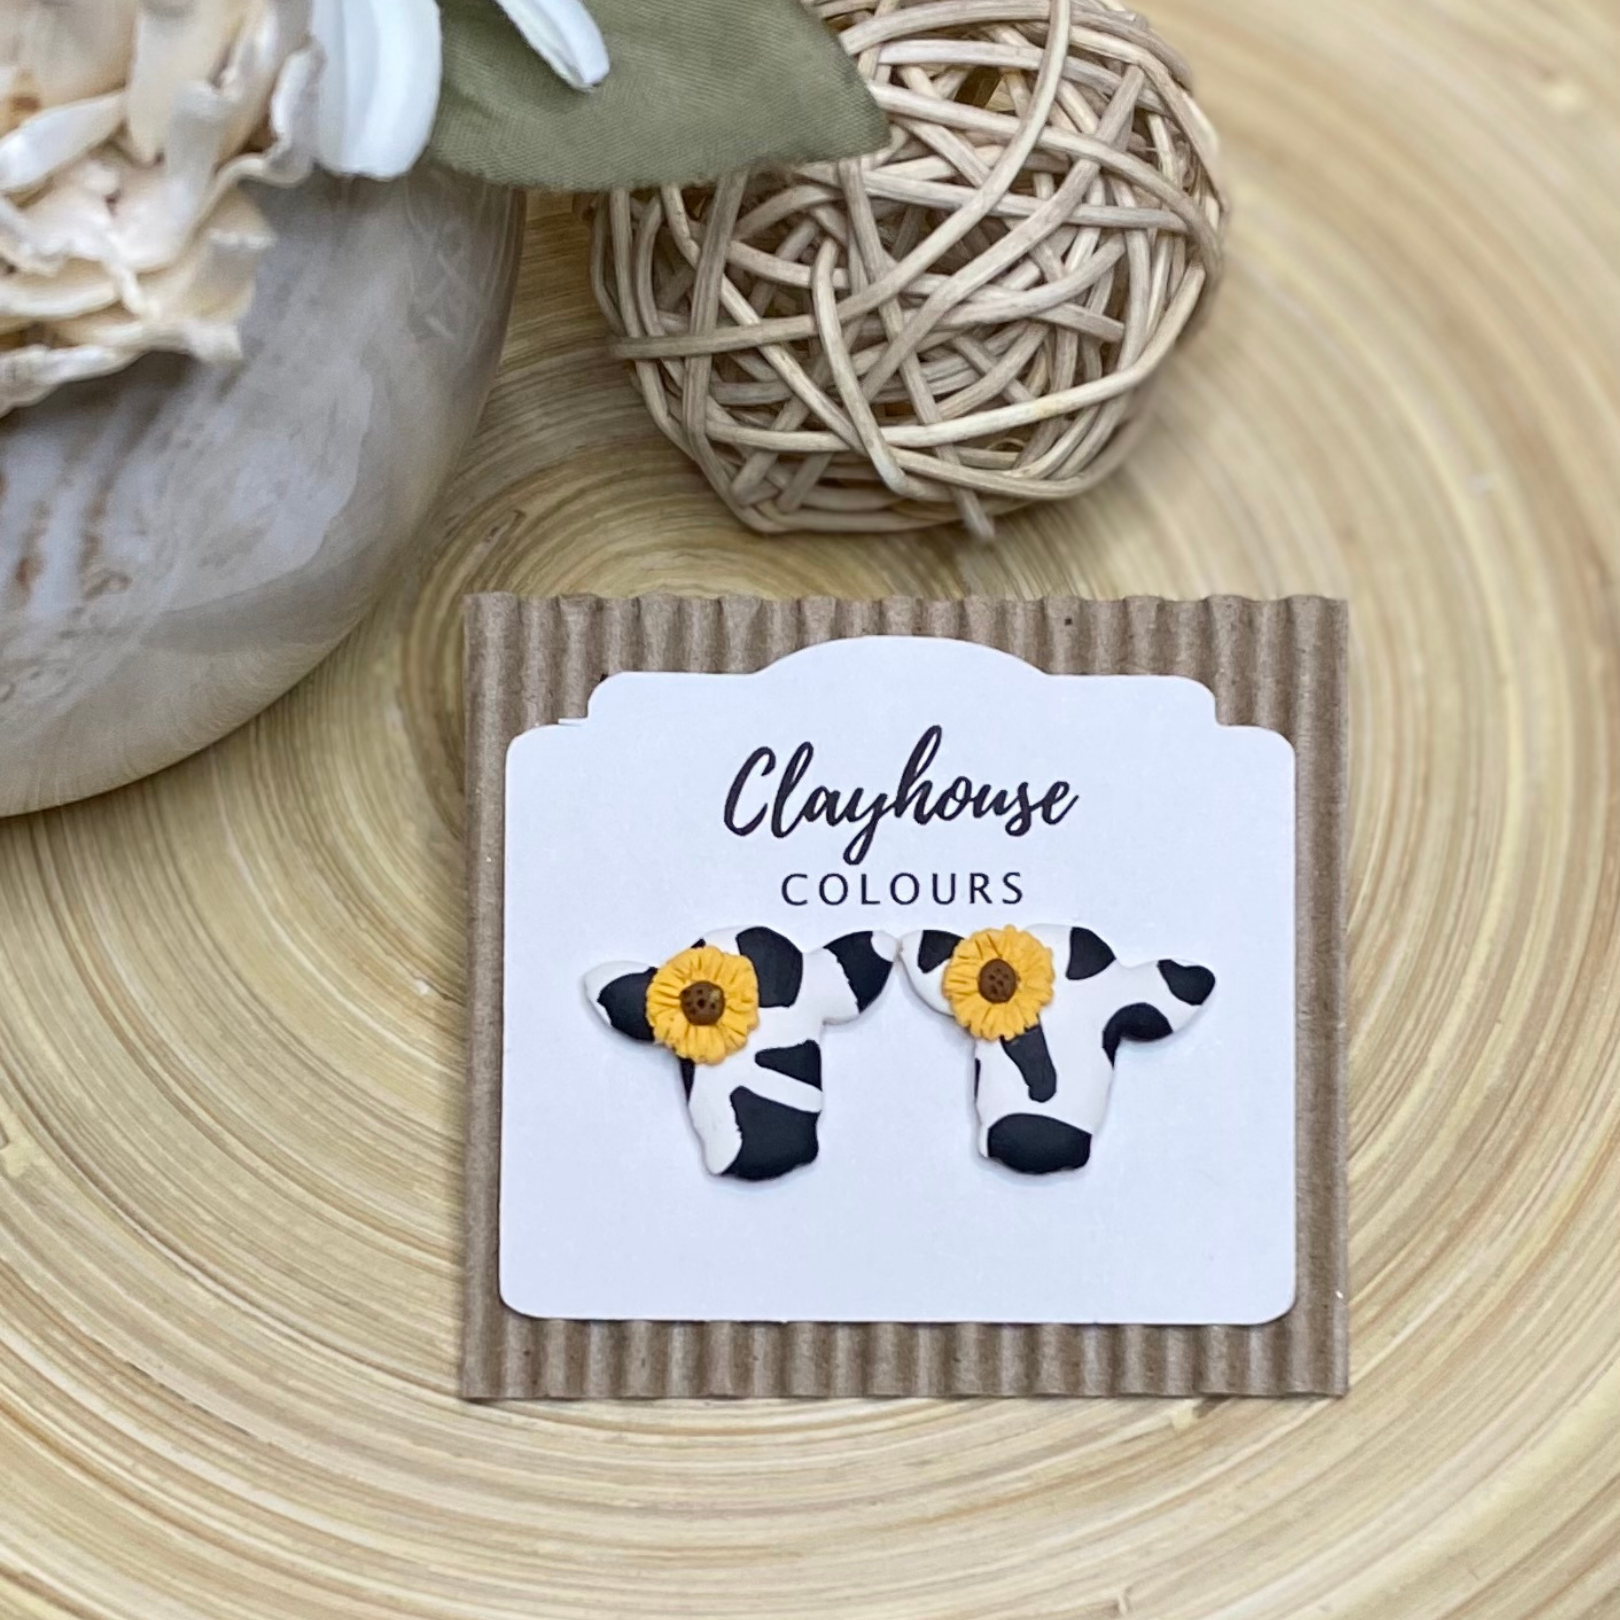 Clayhouse Colours - Cow & Sunflower Stud Earrings